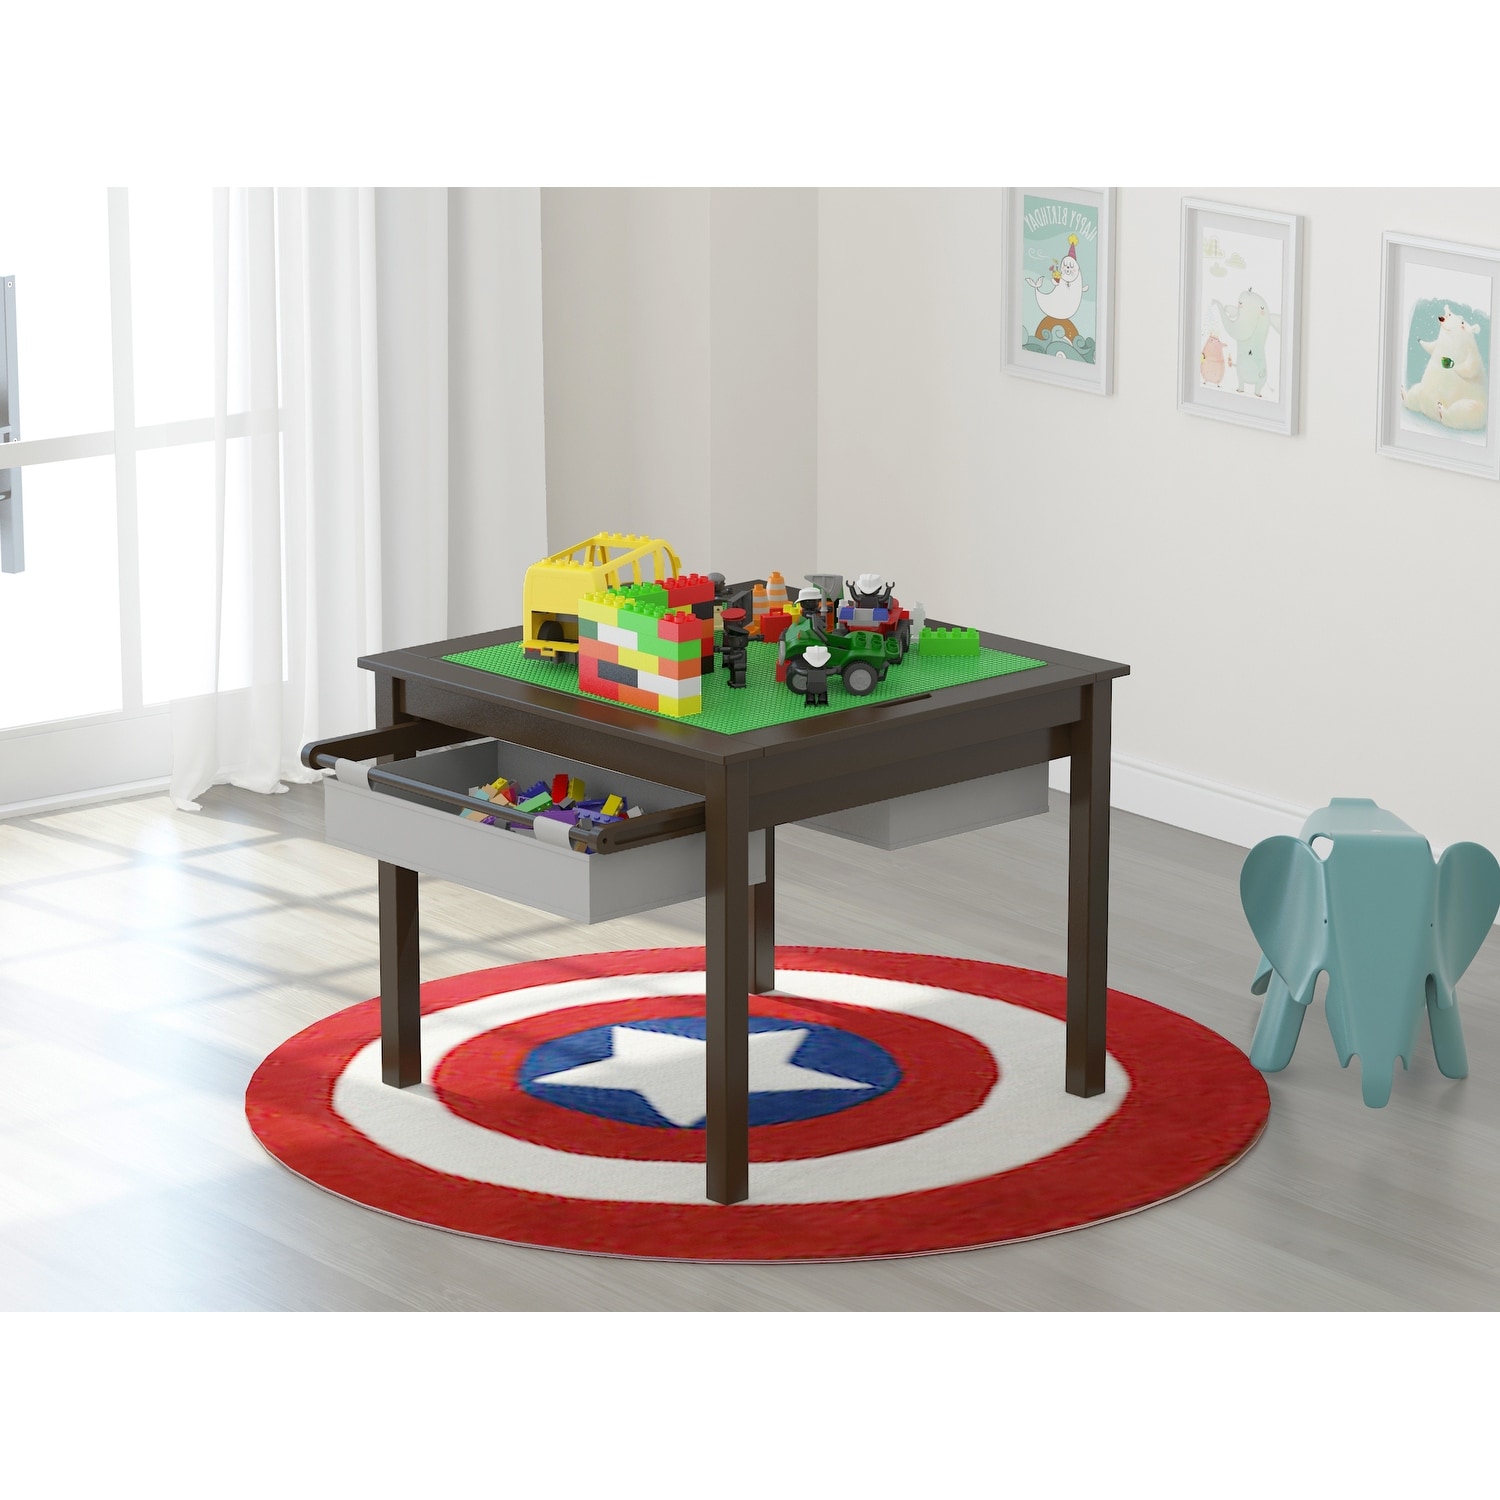 UTEX-2 in 1 Kids Lego Table Set Storage, Table with Chairs, Espresso with Gray Drawer - On Sale - - 32622756